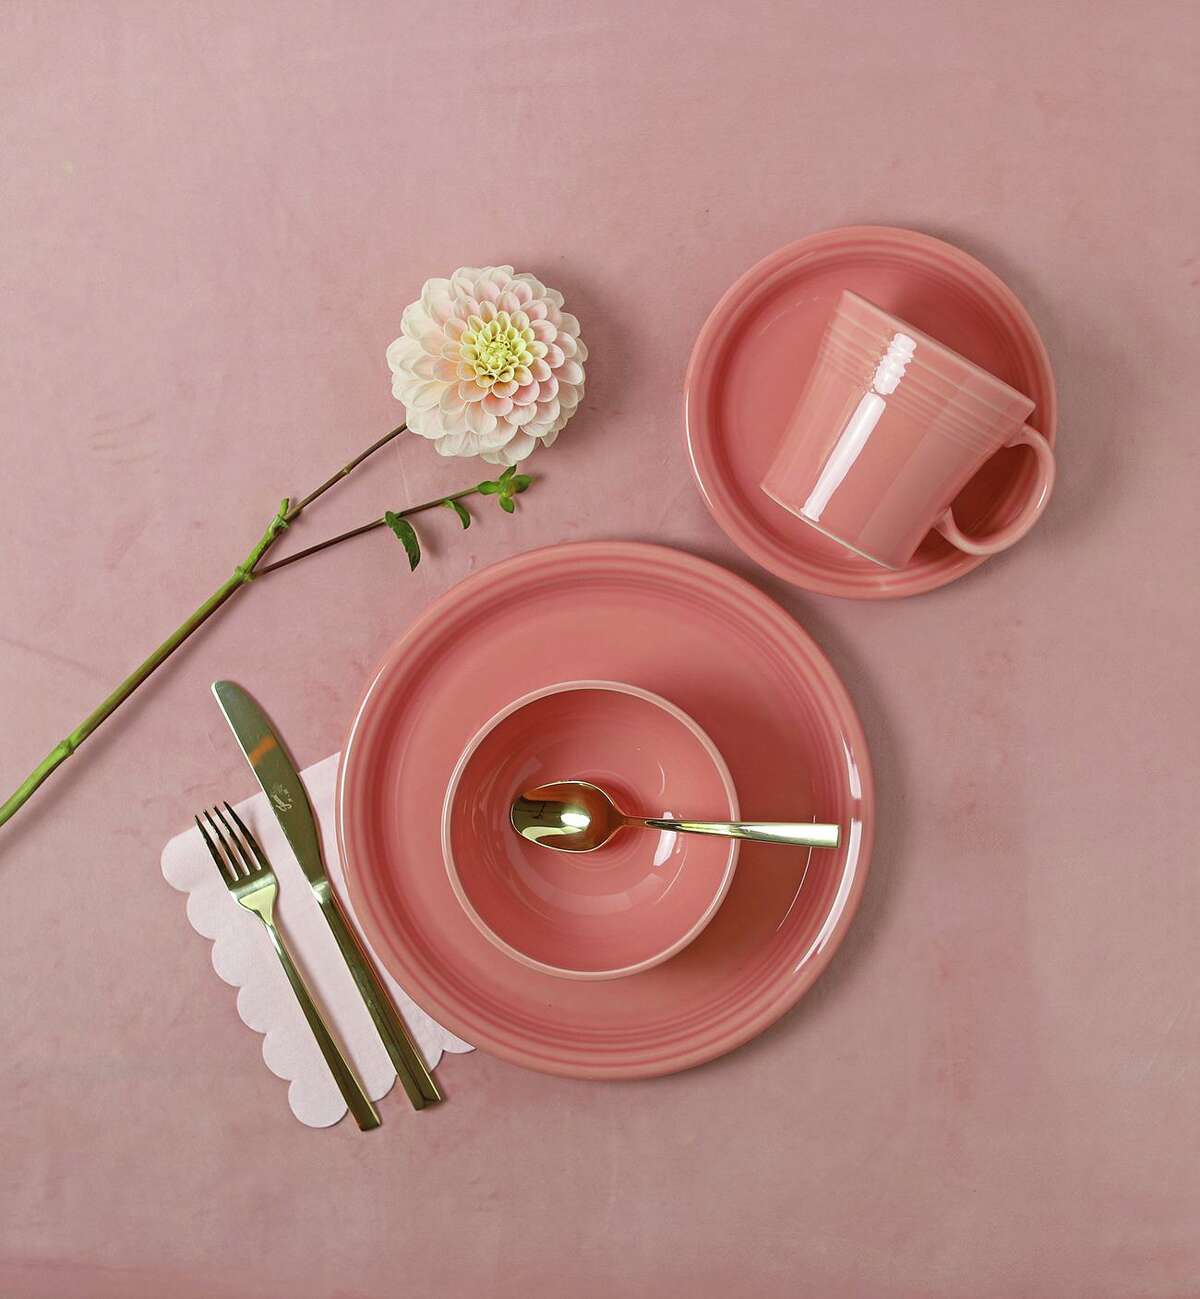 Fiesta's new color for dishes for 2022 is Peony, a pretty pink perfect for spring and summer.